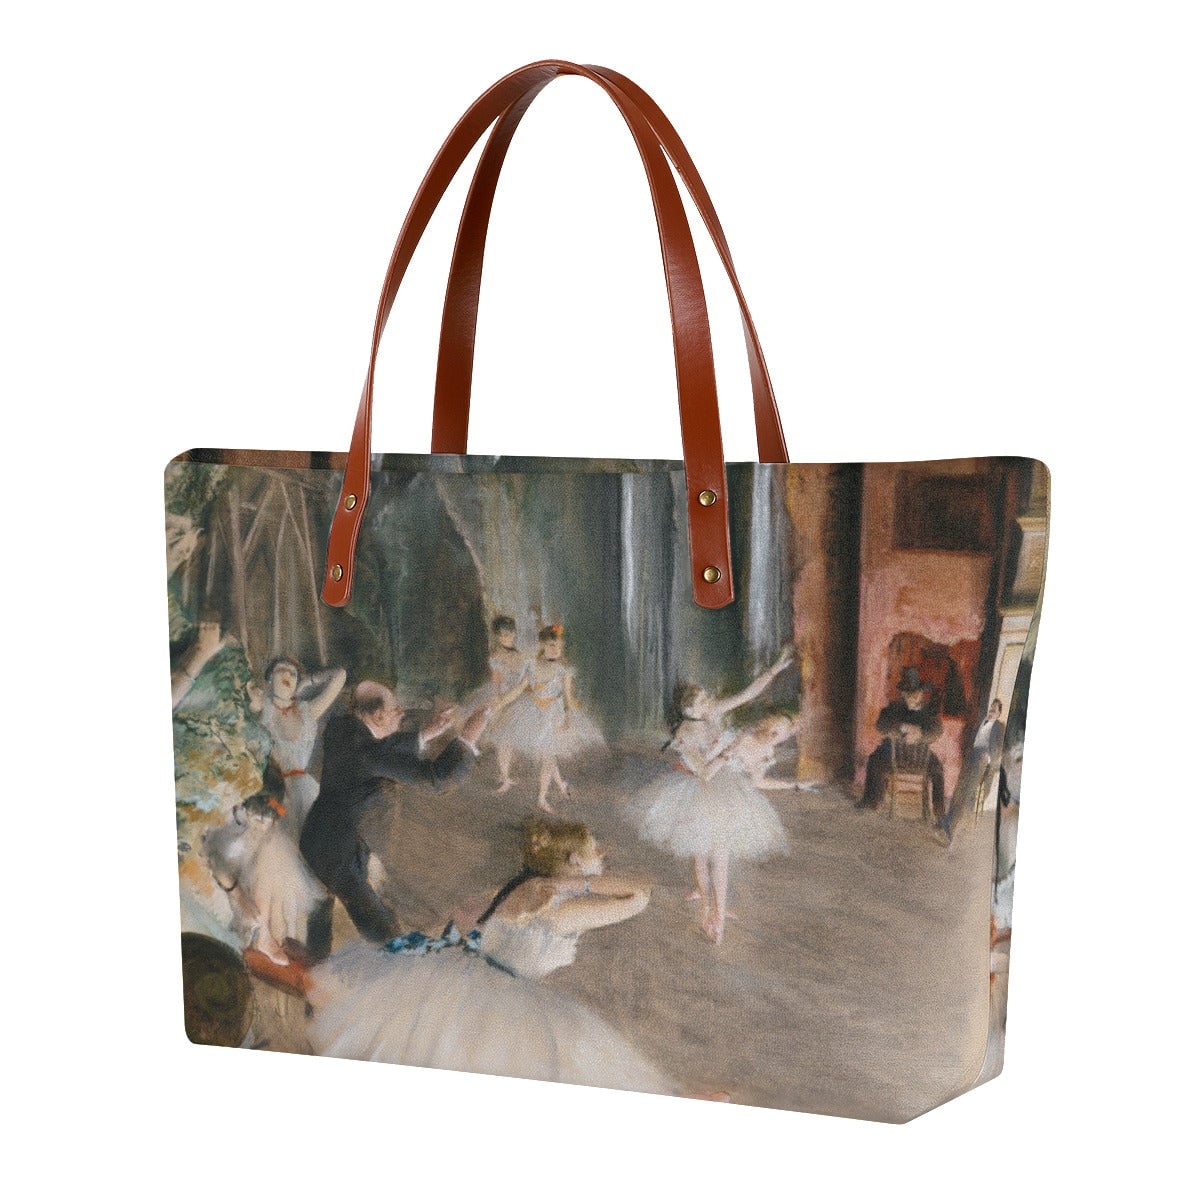 The Rehearsal Onstage by Edgar Degas Tote Bag